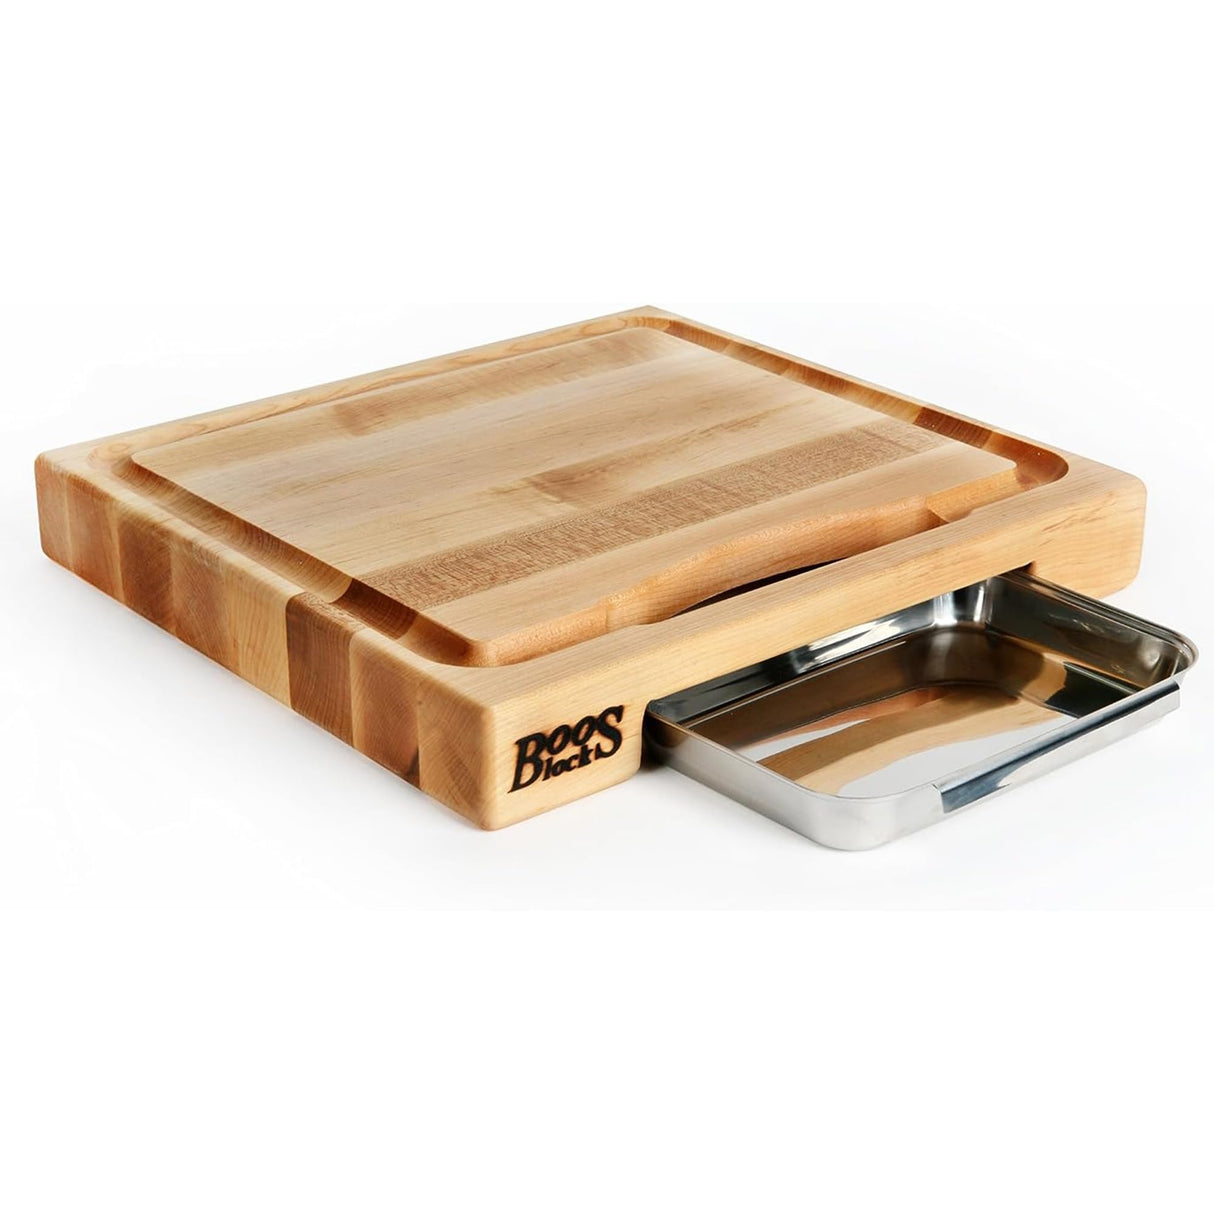 John Boos PM1514225-P Newton Prep Master Large Maple Wood Cutting Board for Kitchen, 15 Inches x 14 Inches, 2.25 Thick Reversible Edge Grain with Juice Groove & Stainless Pan 15X14X2.25 MPL-EDGE GR-PREP MASTER-